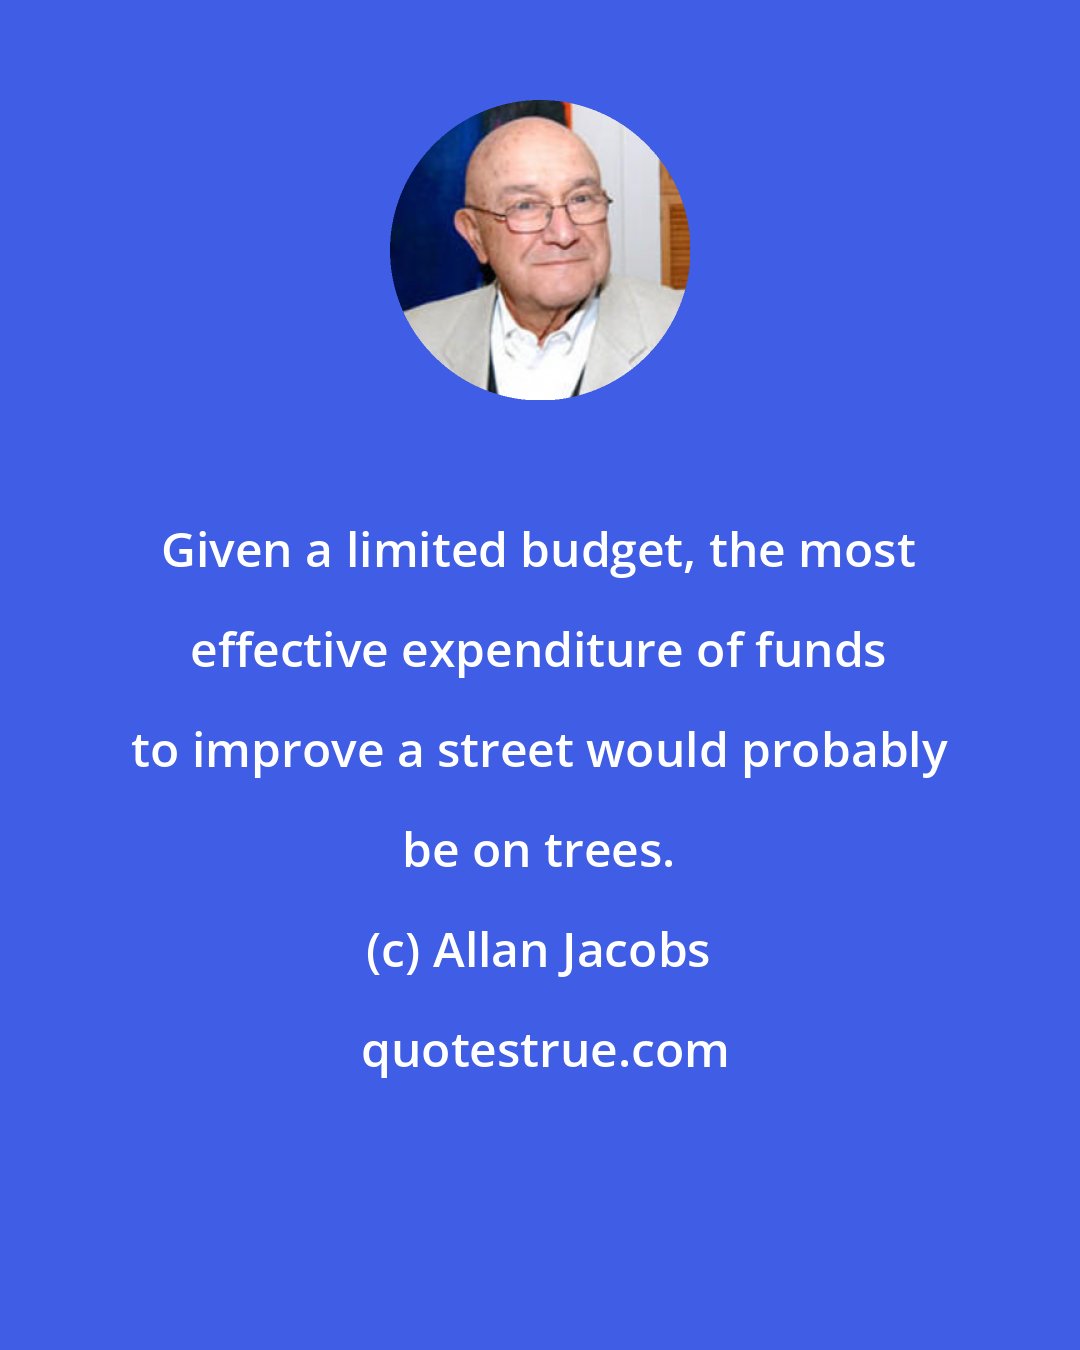 Allan Jacobs: Given a limited budget, the most effective expenditure of funds to improve a street would probably be on trees.